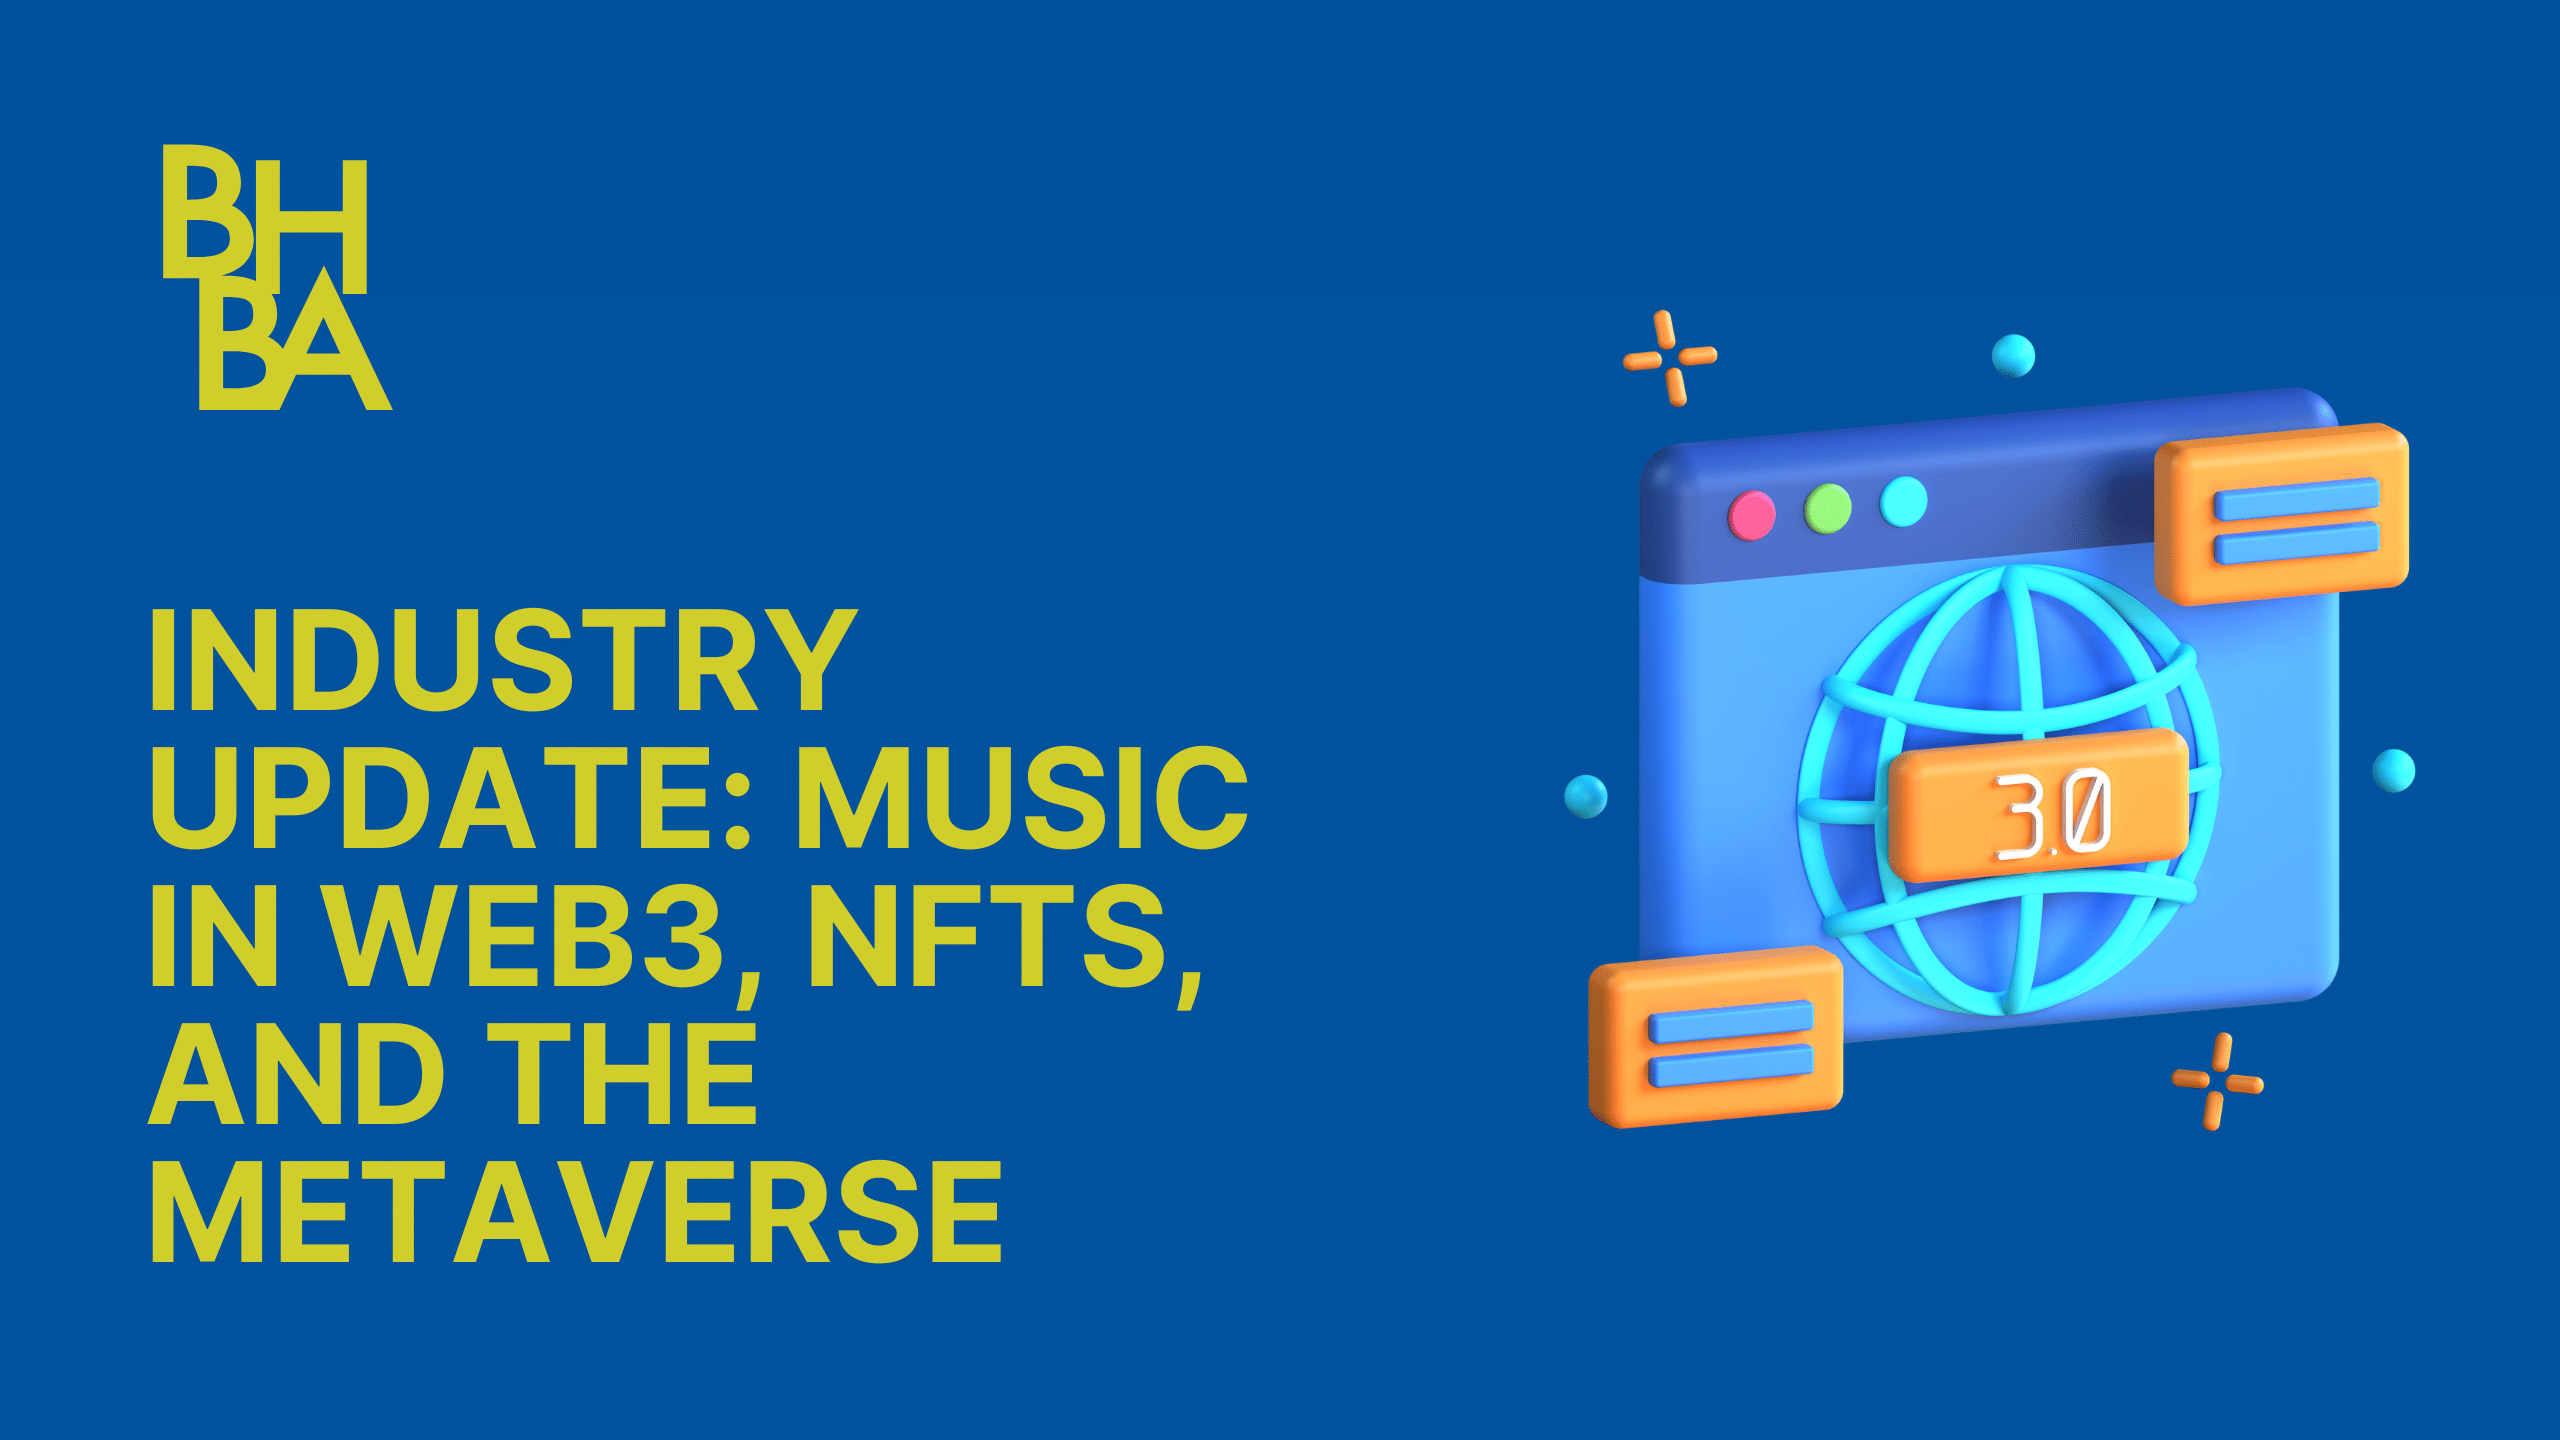 Industry Update: Music in Web3, NFTs, and the Metaverse